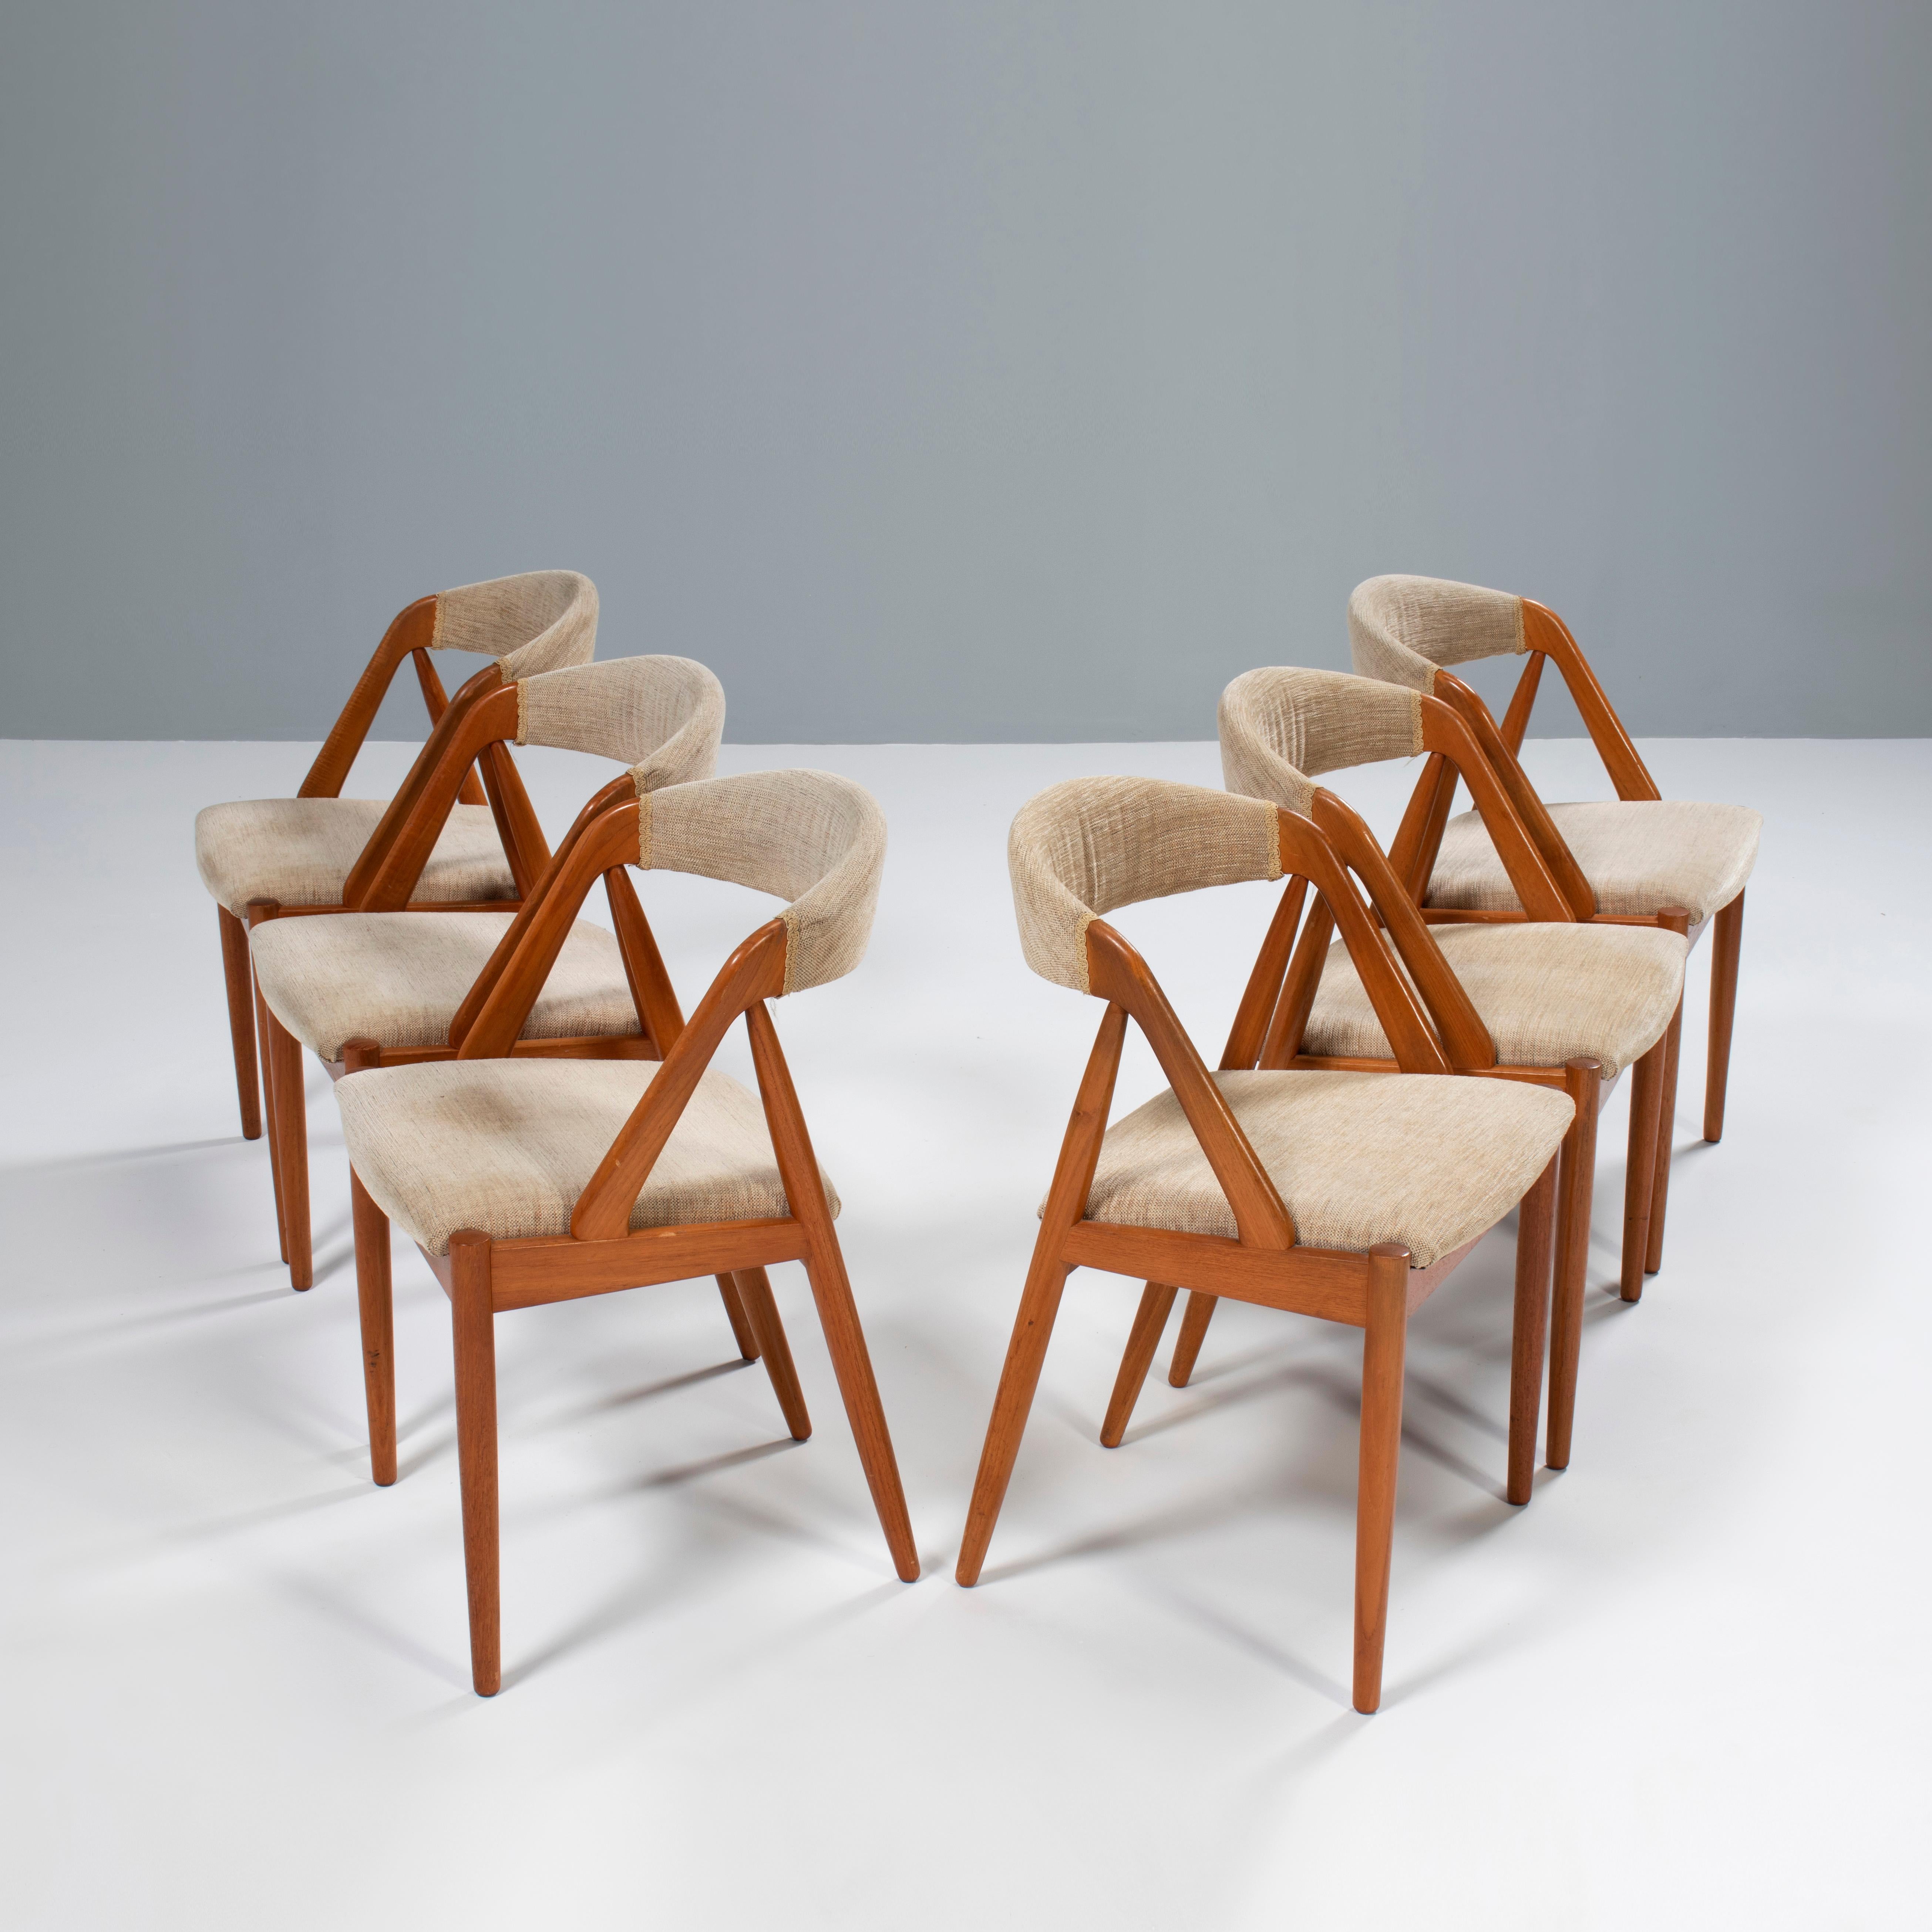 Designed by Kai Kristiansen for Schou Andersen the Model 31 dining chair is a fantastic example of classic Danish Mid-Century design.

Constructed from teak, the chairs have a classic silhouette combining a curved backrest with angled legs and arm